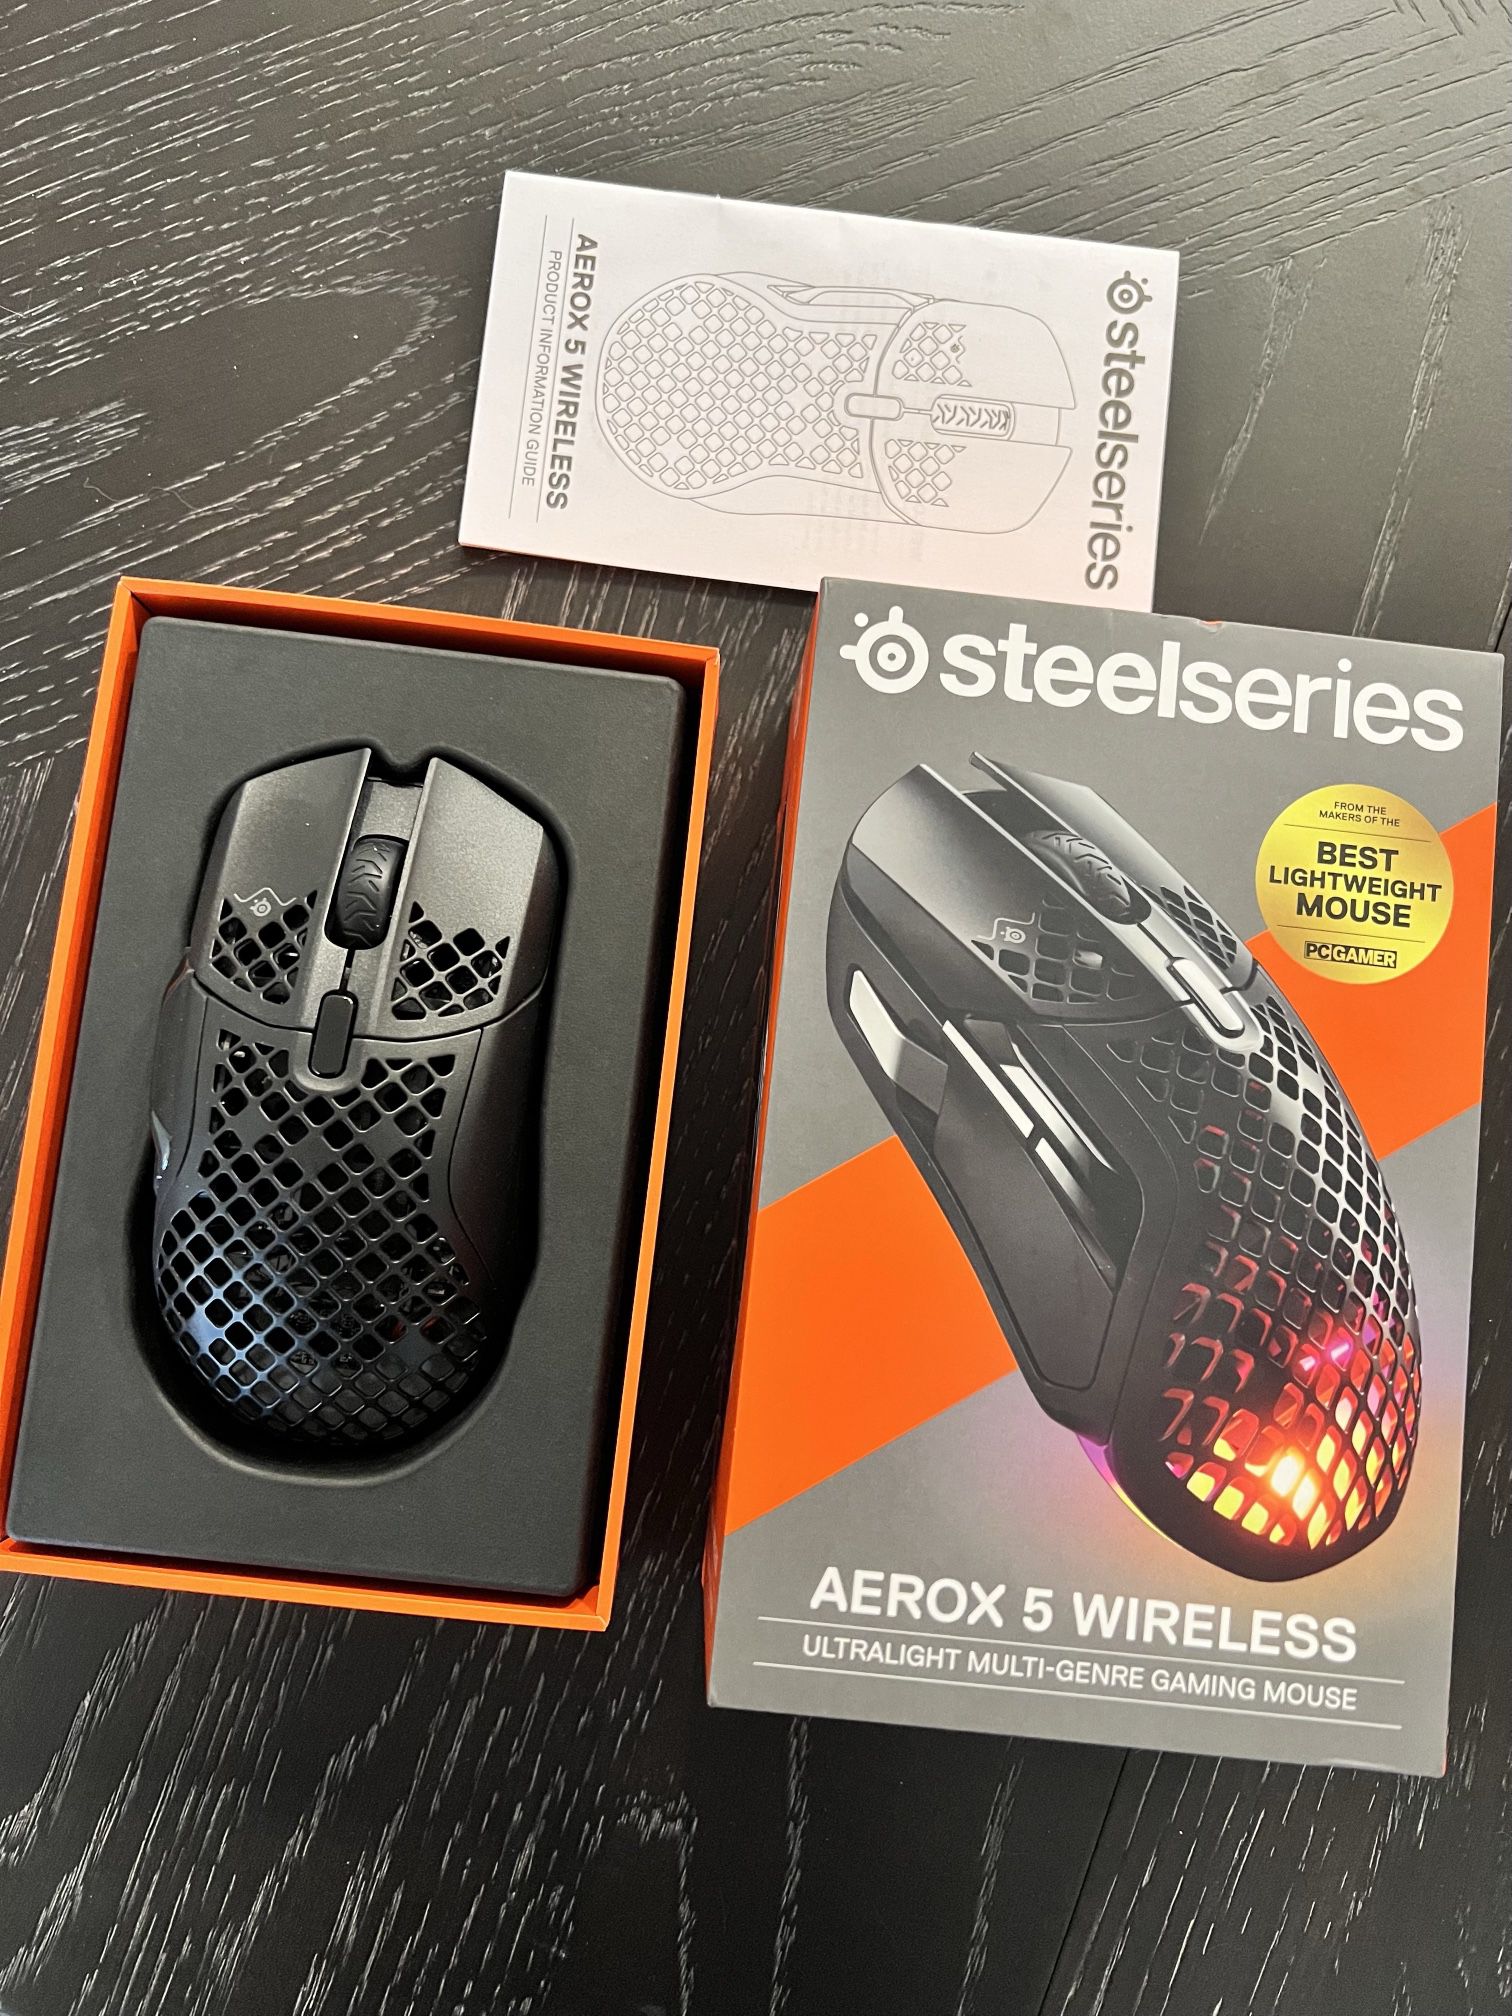 Steelseries AEROX 5 WIRELESS Gaming Mouse